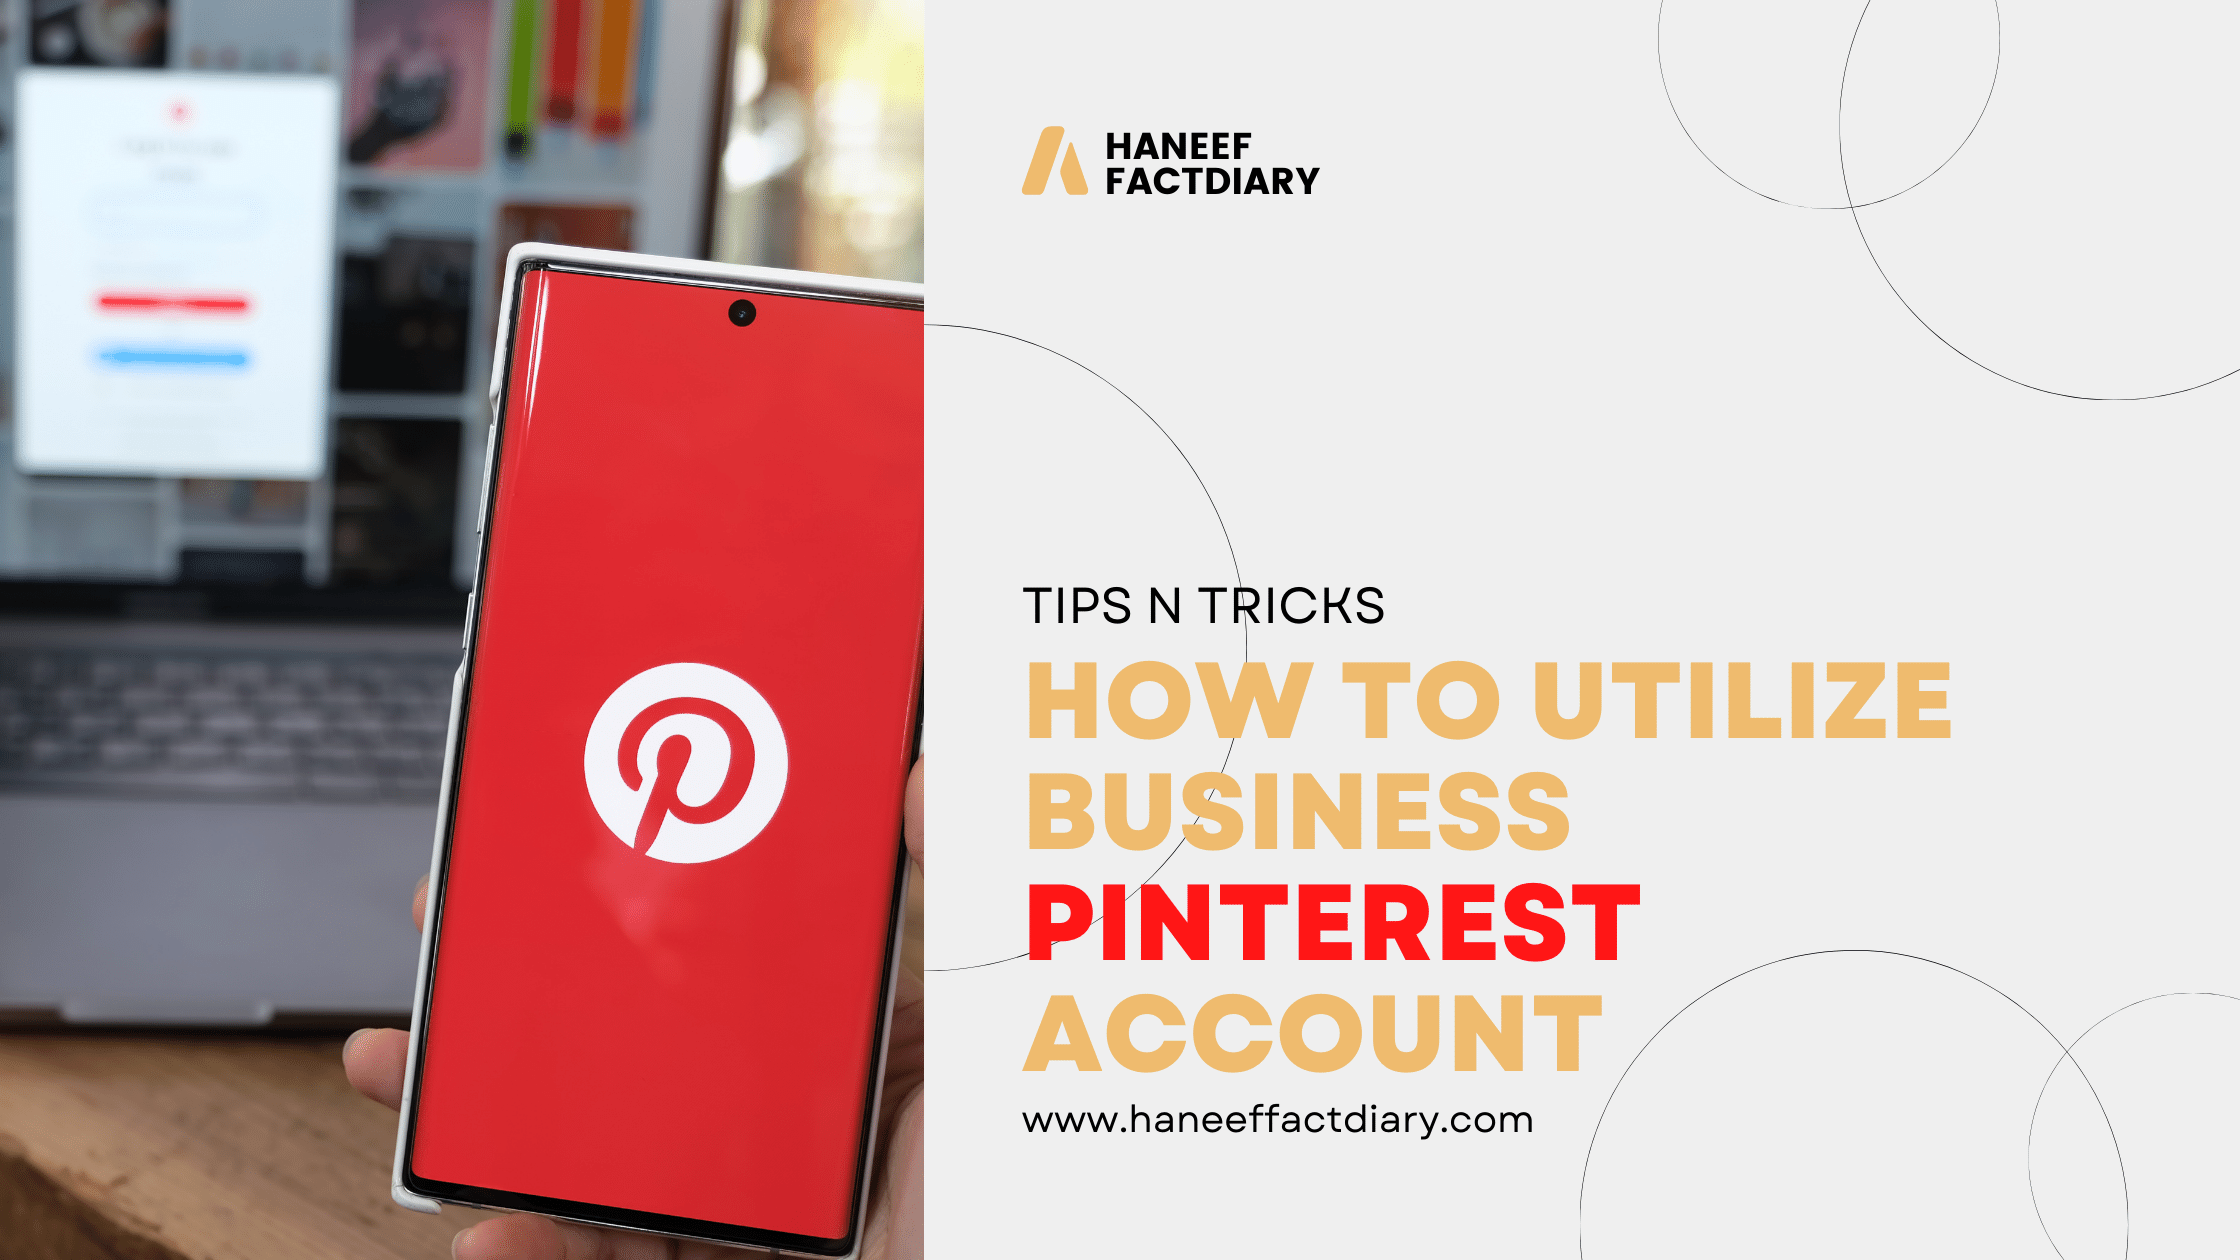 How to Utilize Business Pinterest Account